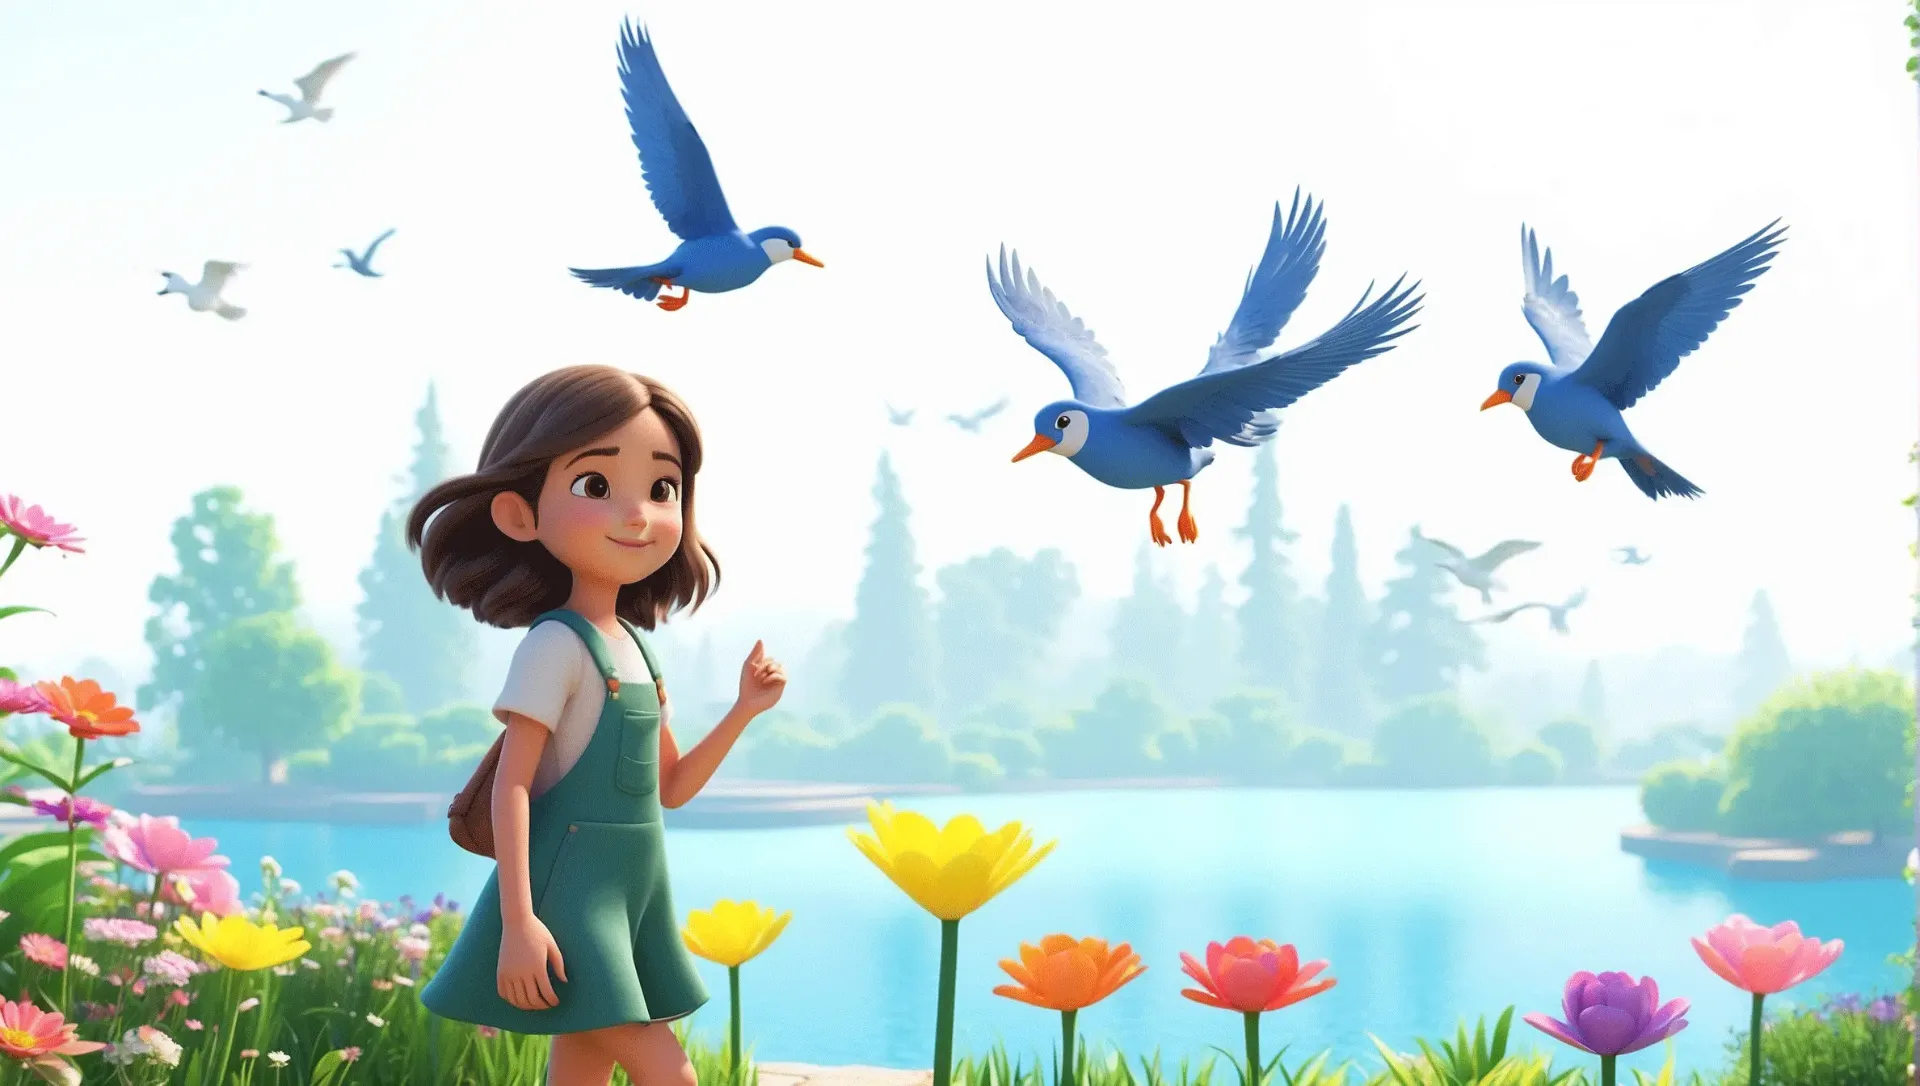 Cute Girl at Park Playing with Birds 3D Character Artwork Illustration